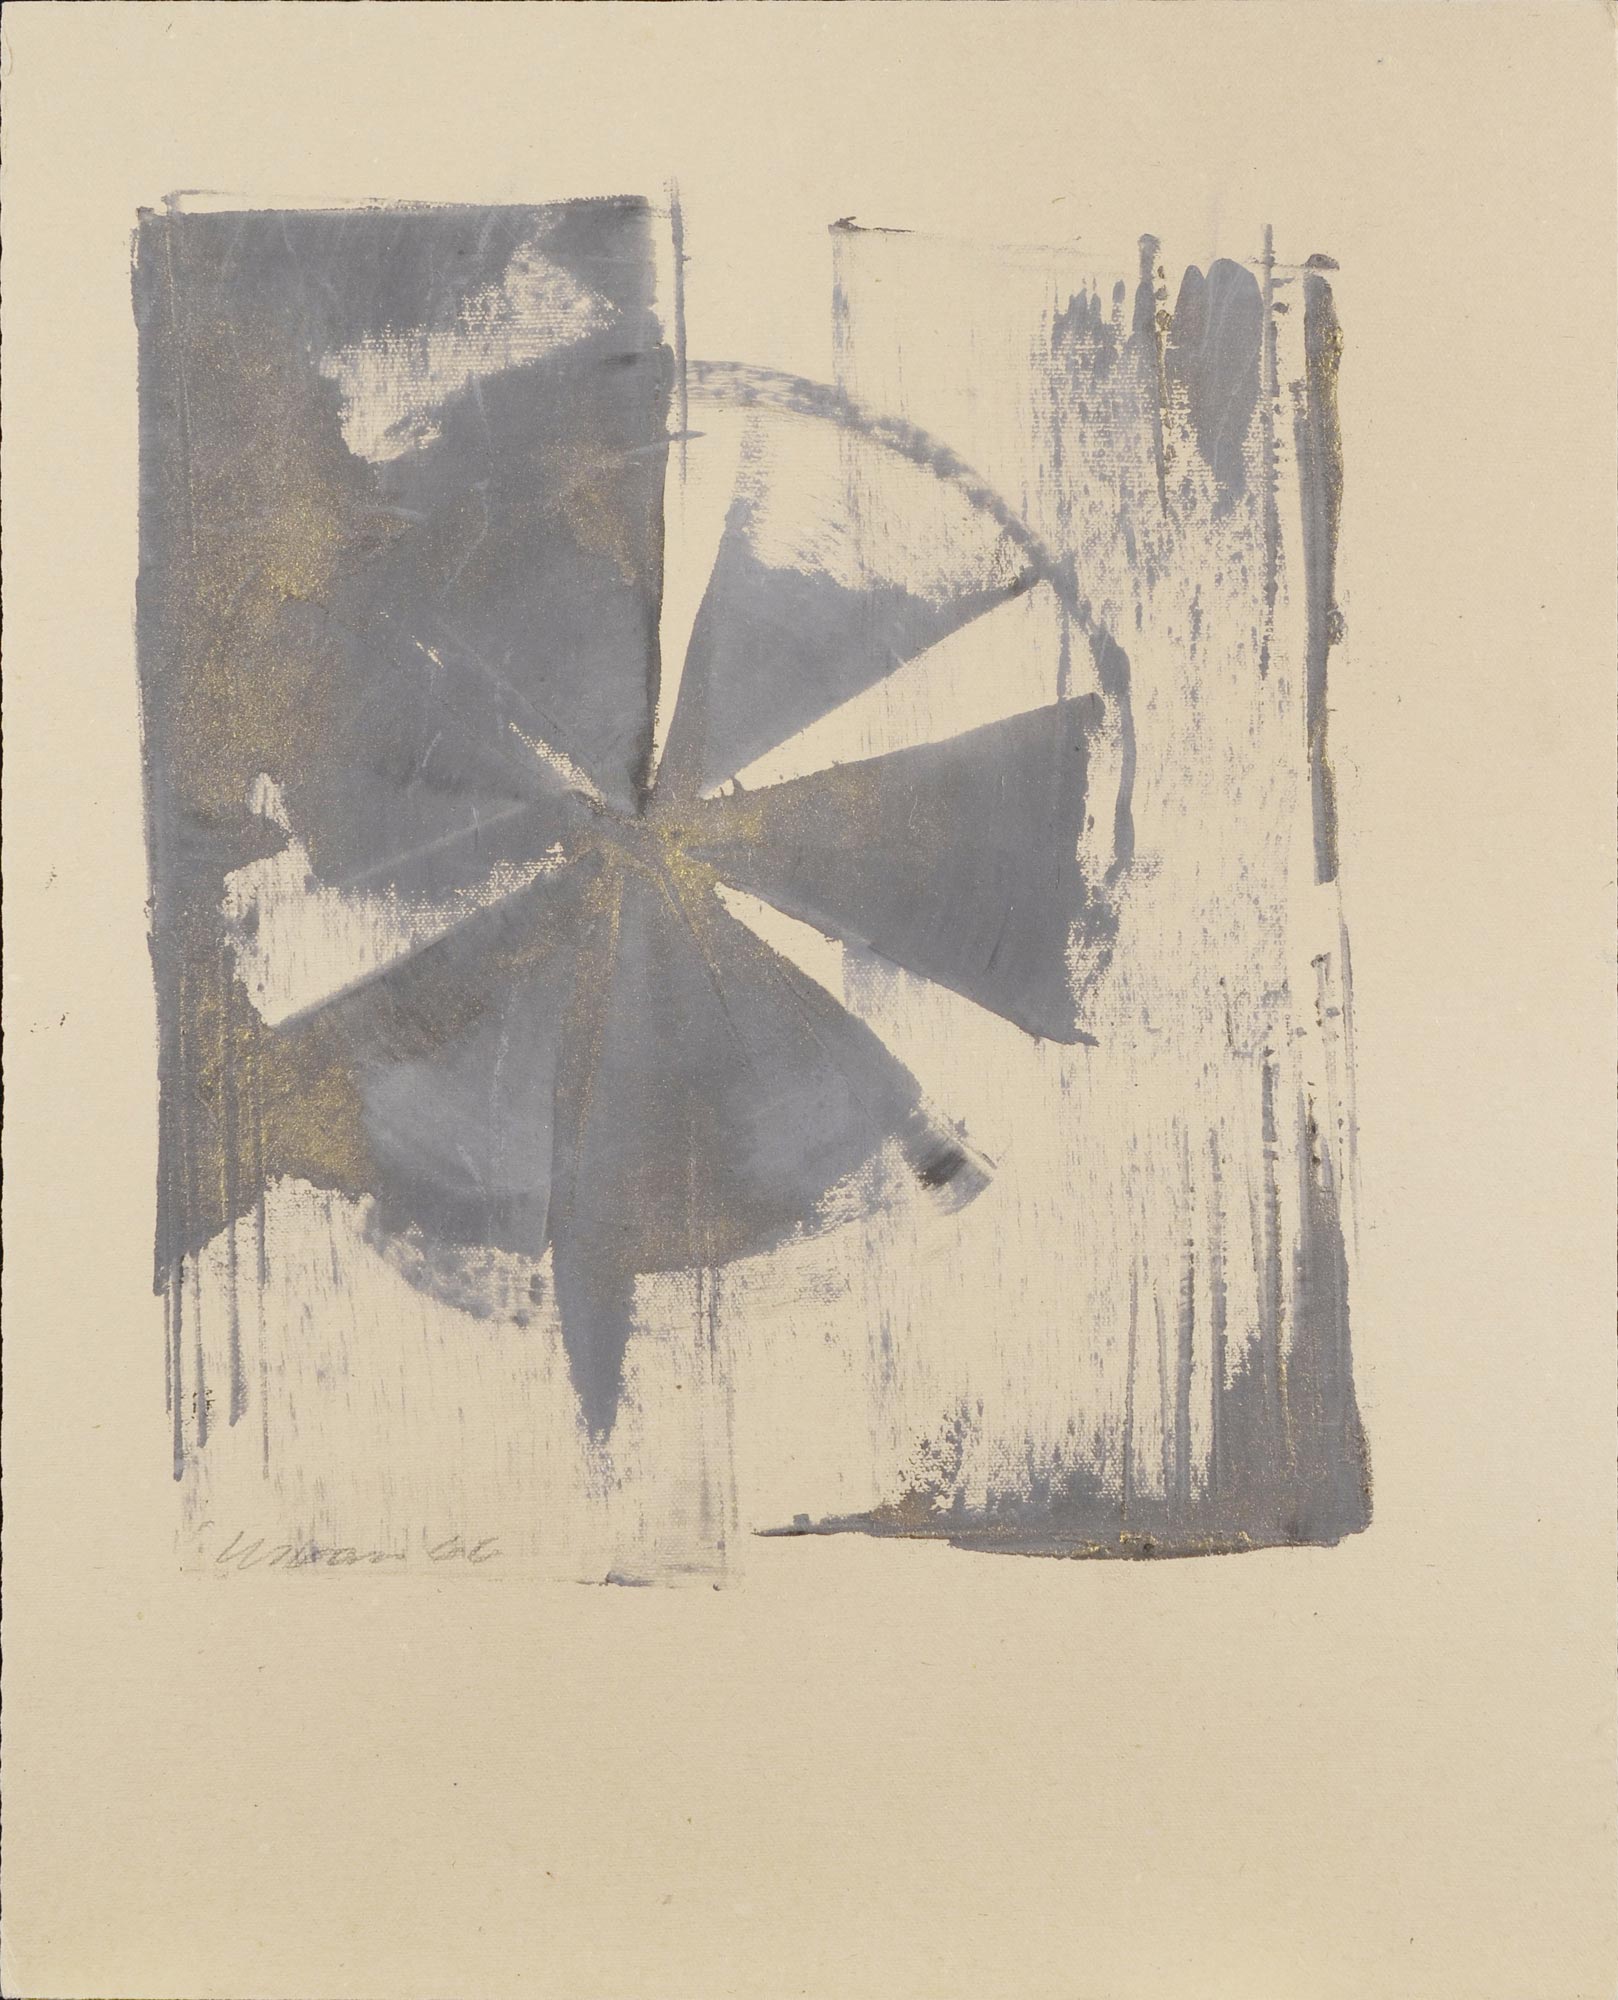 Vladislav Urban (*1937)  LIFE CIRCLE. 1966. Monotype on cardboard, 204x178 mm, signed and dated ‘